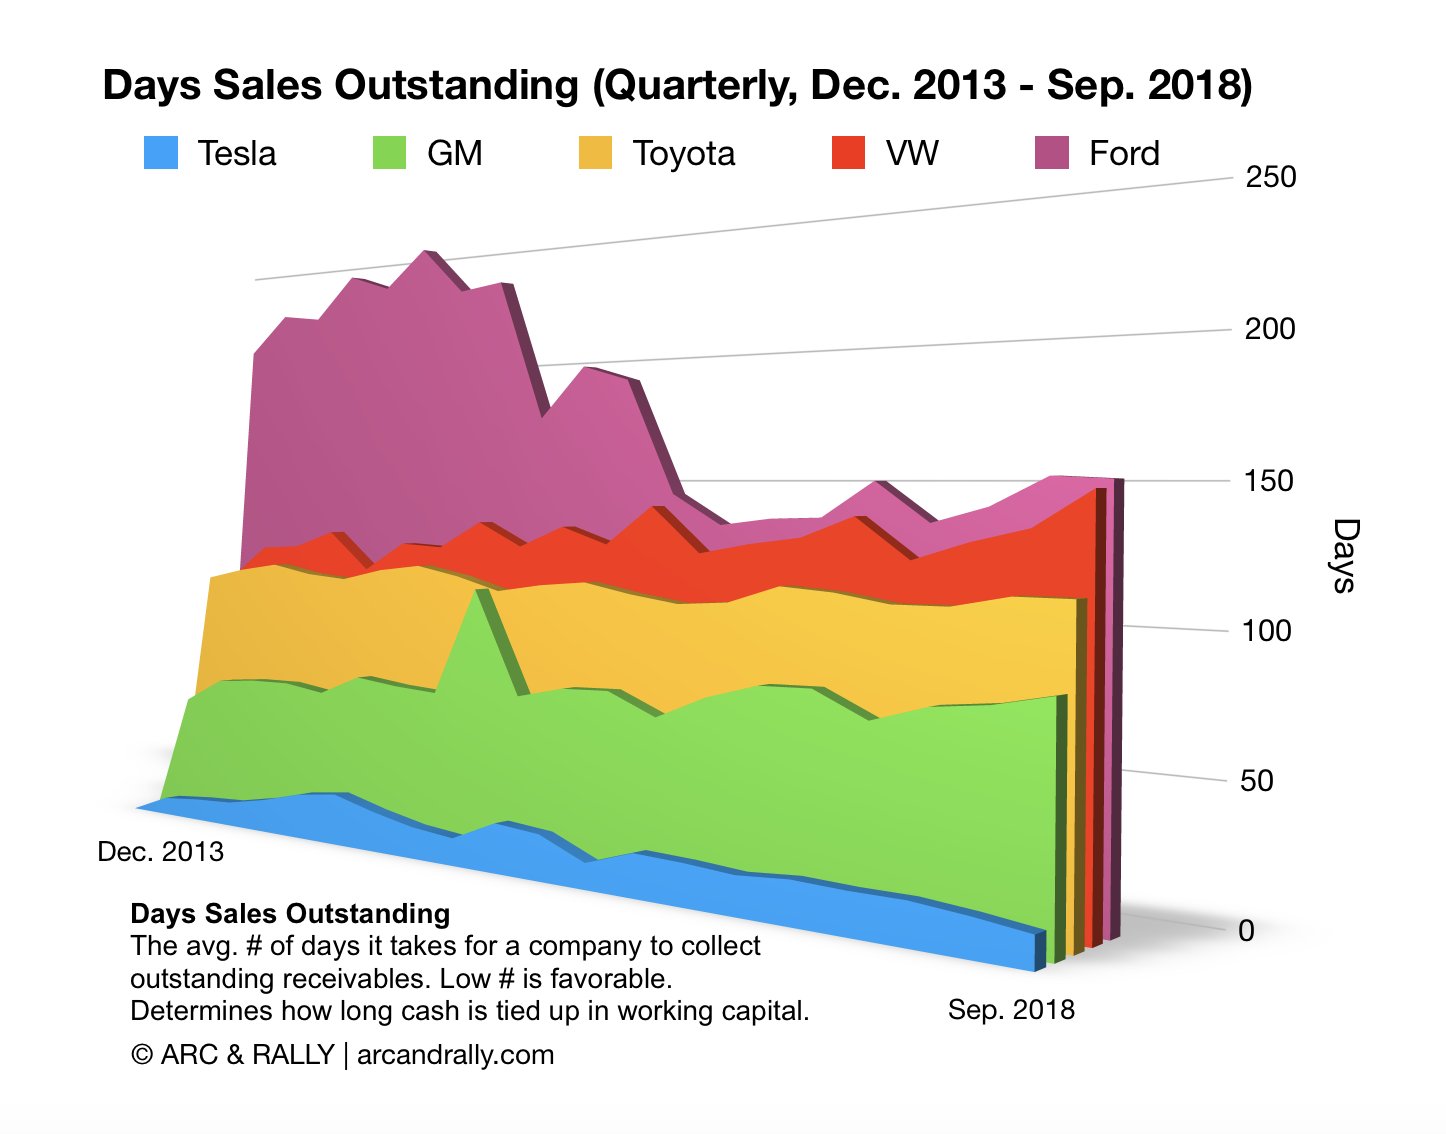 Day Sales Outstanding chart - Tesla, GM, Toyota, VW, Ford